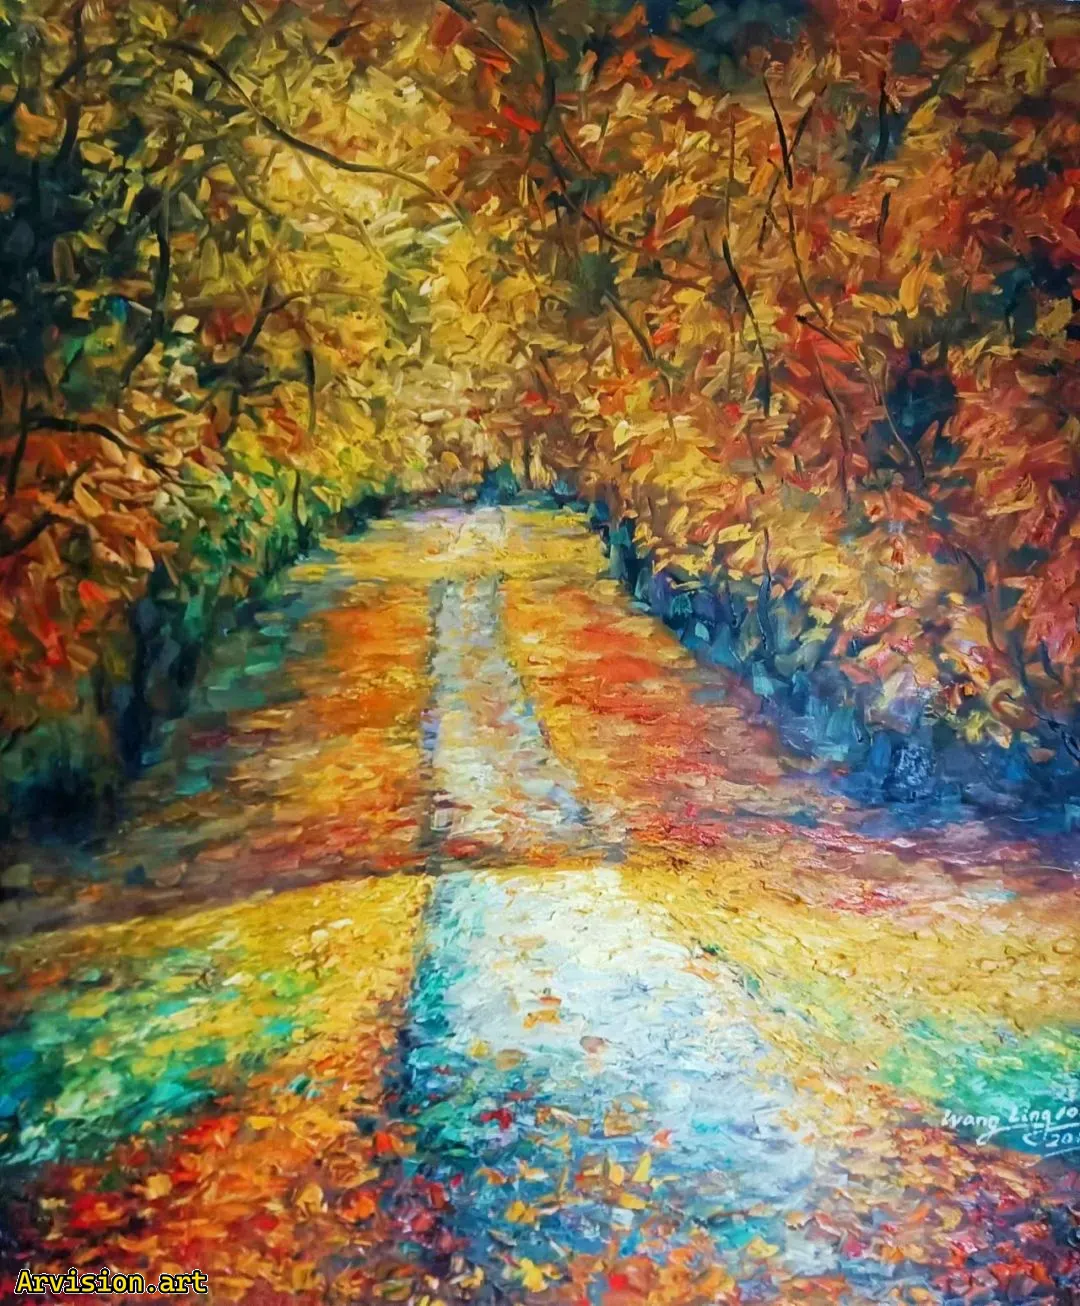 Wang Lin's oil painting of rural roads in late autumn